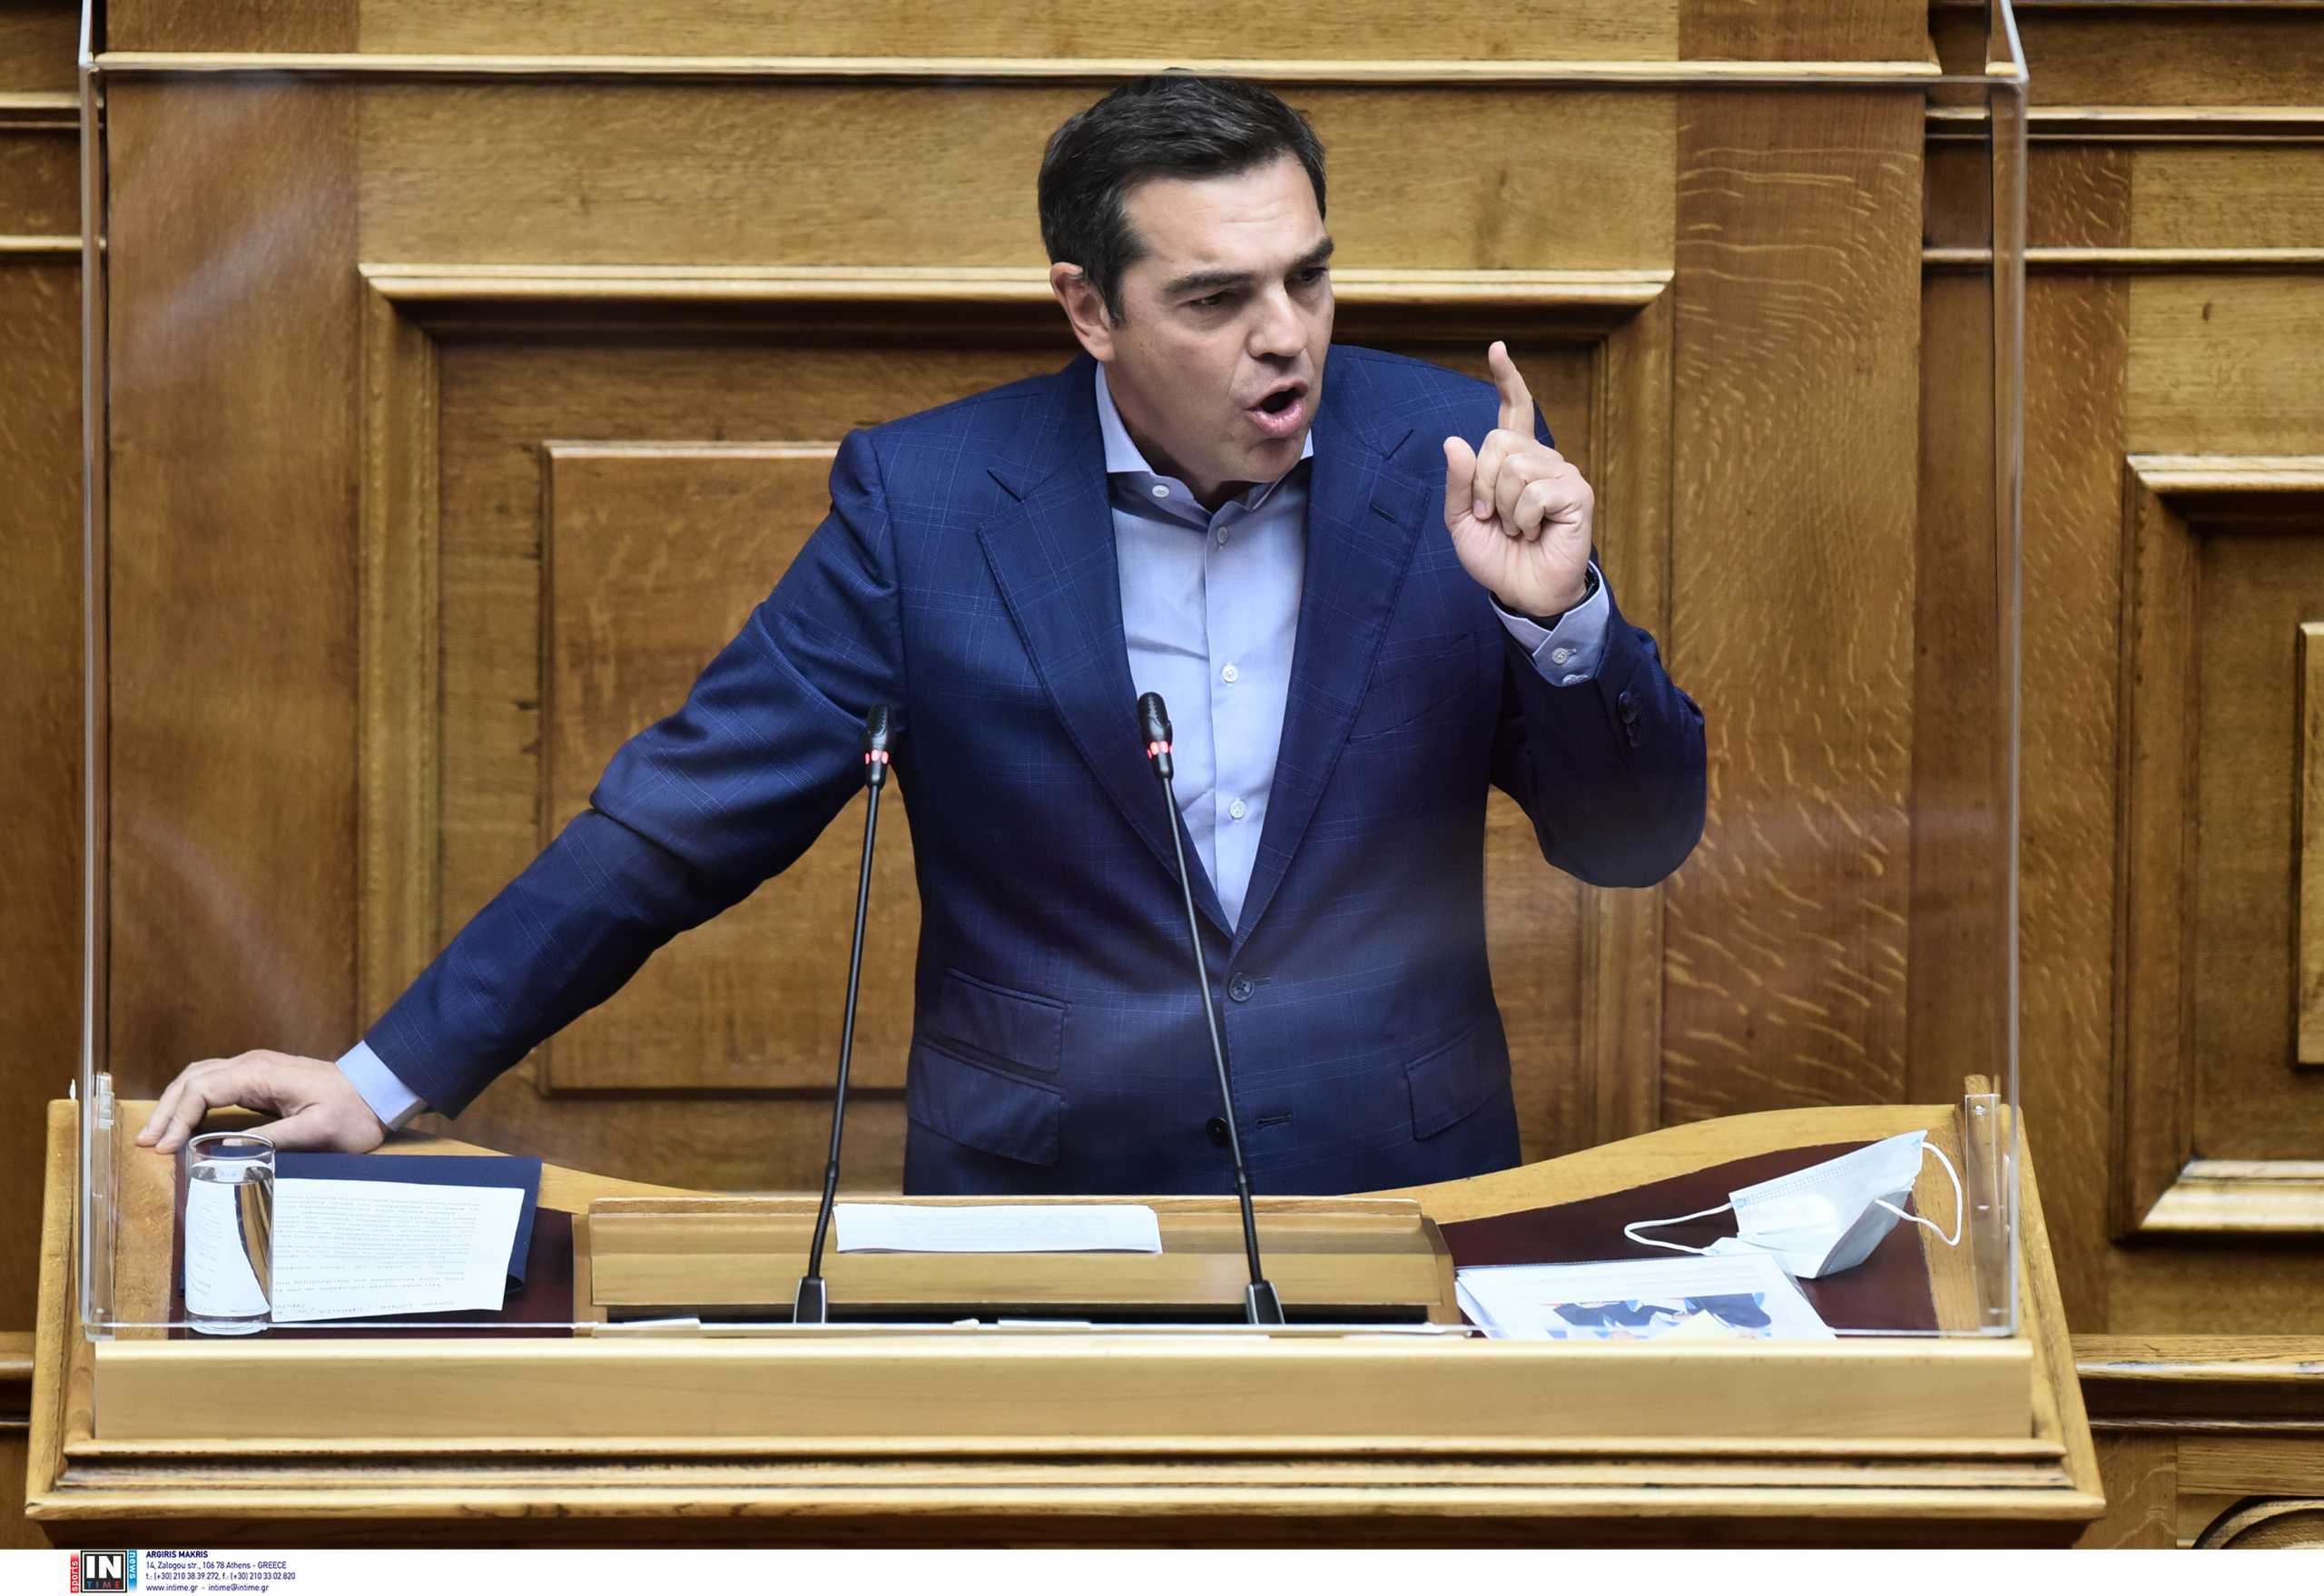 tsipras_vouli071021-scaled.jpg